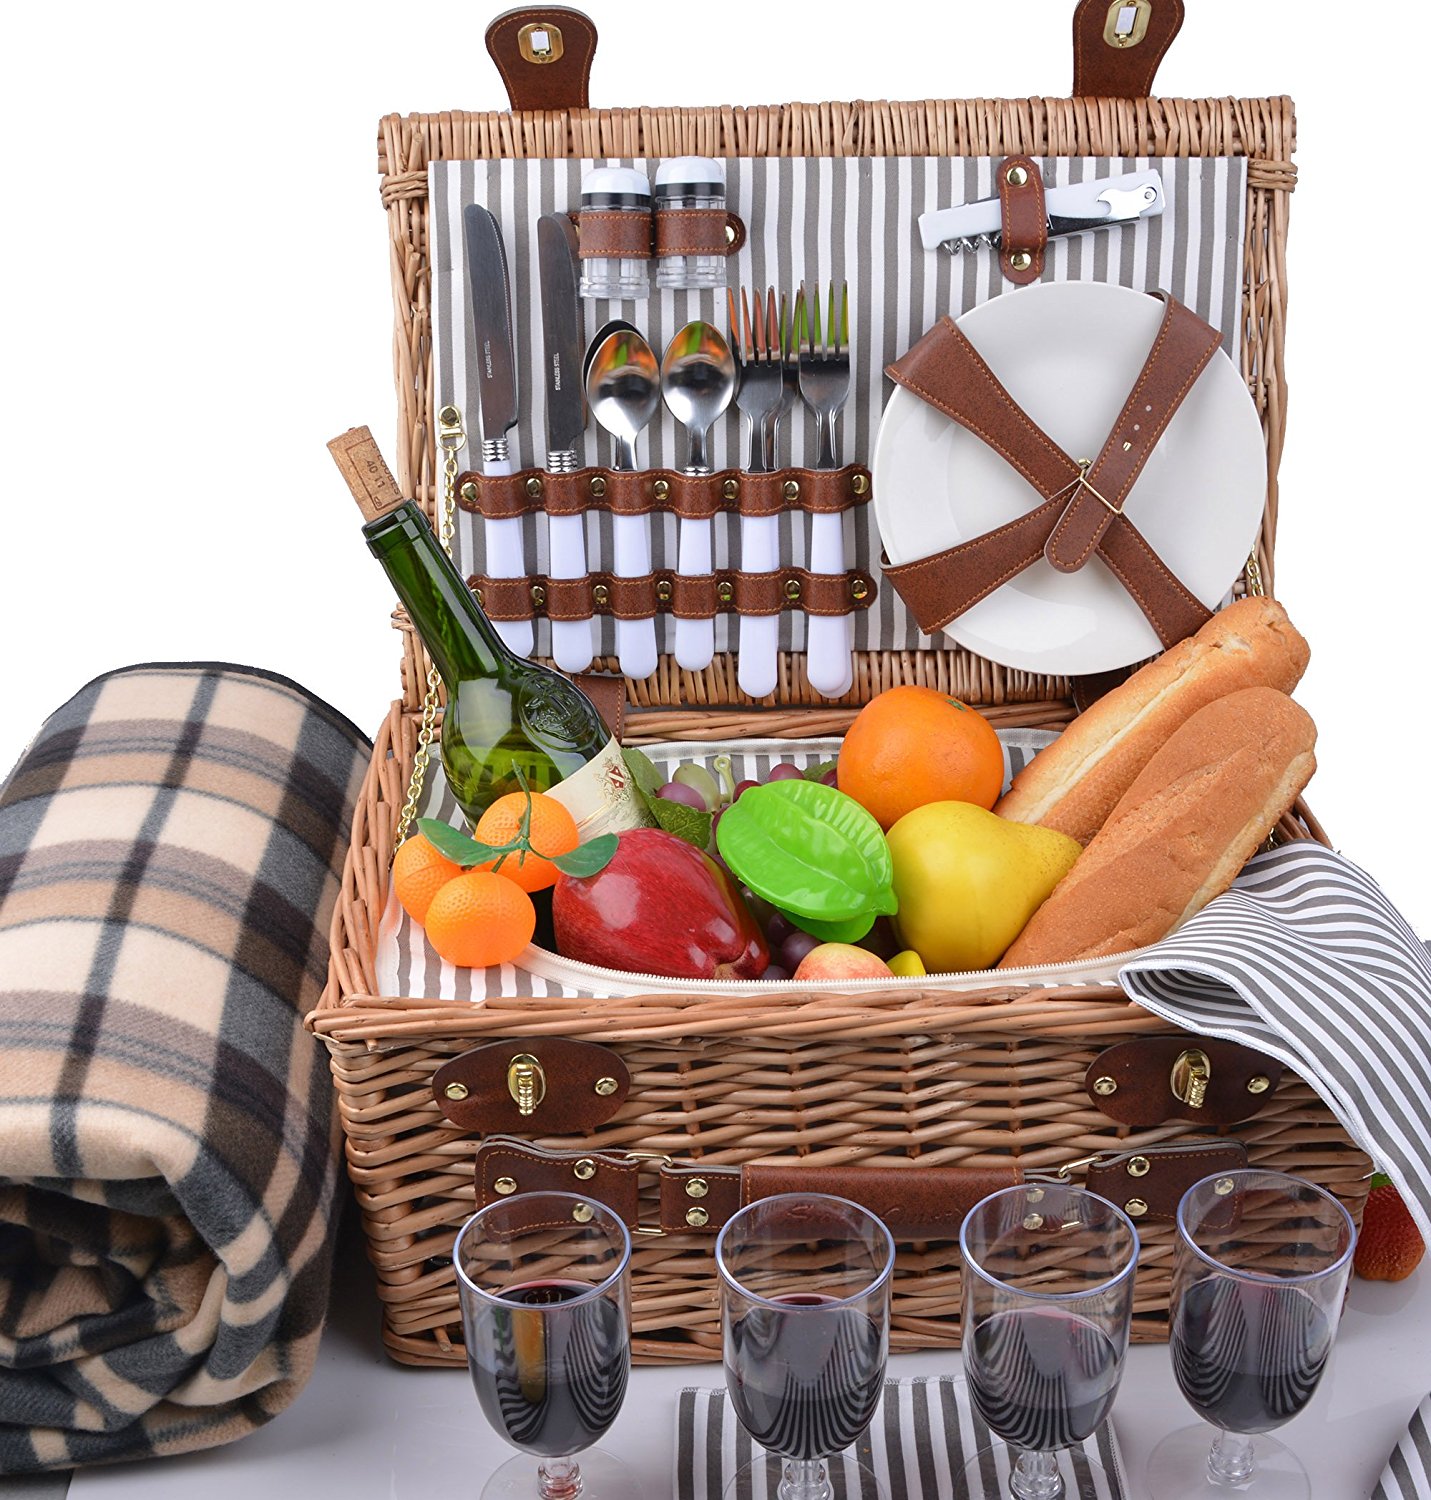 Enjoy The Outdoors with A Vintage Picnic Basket